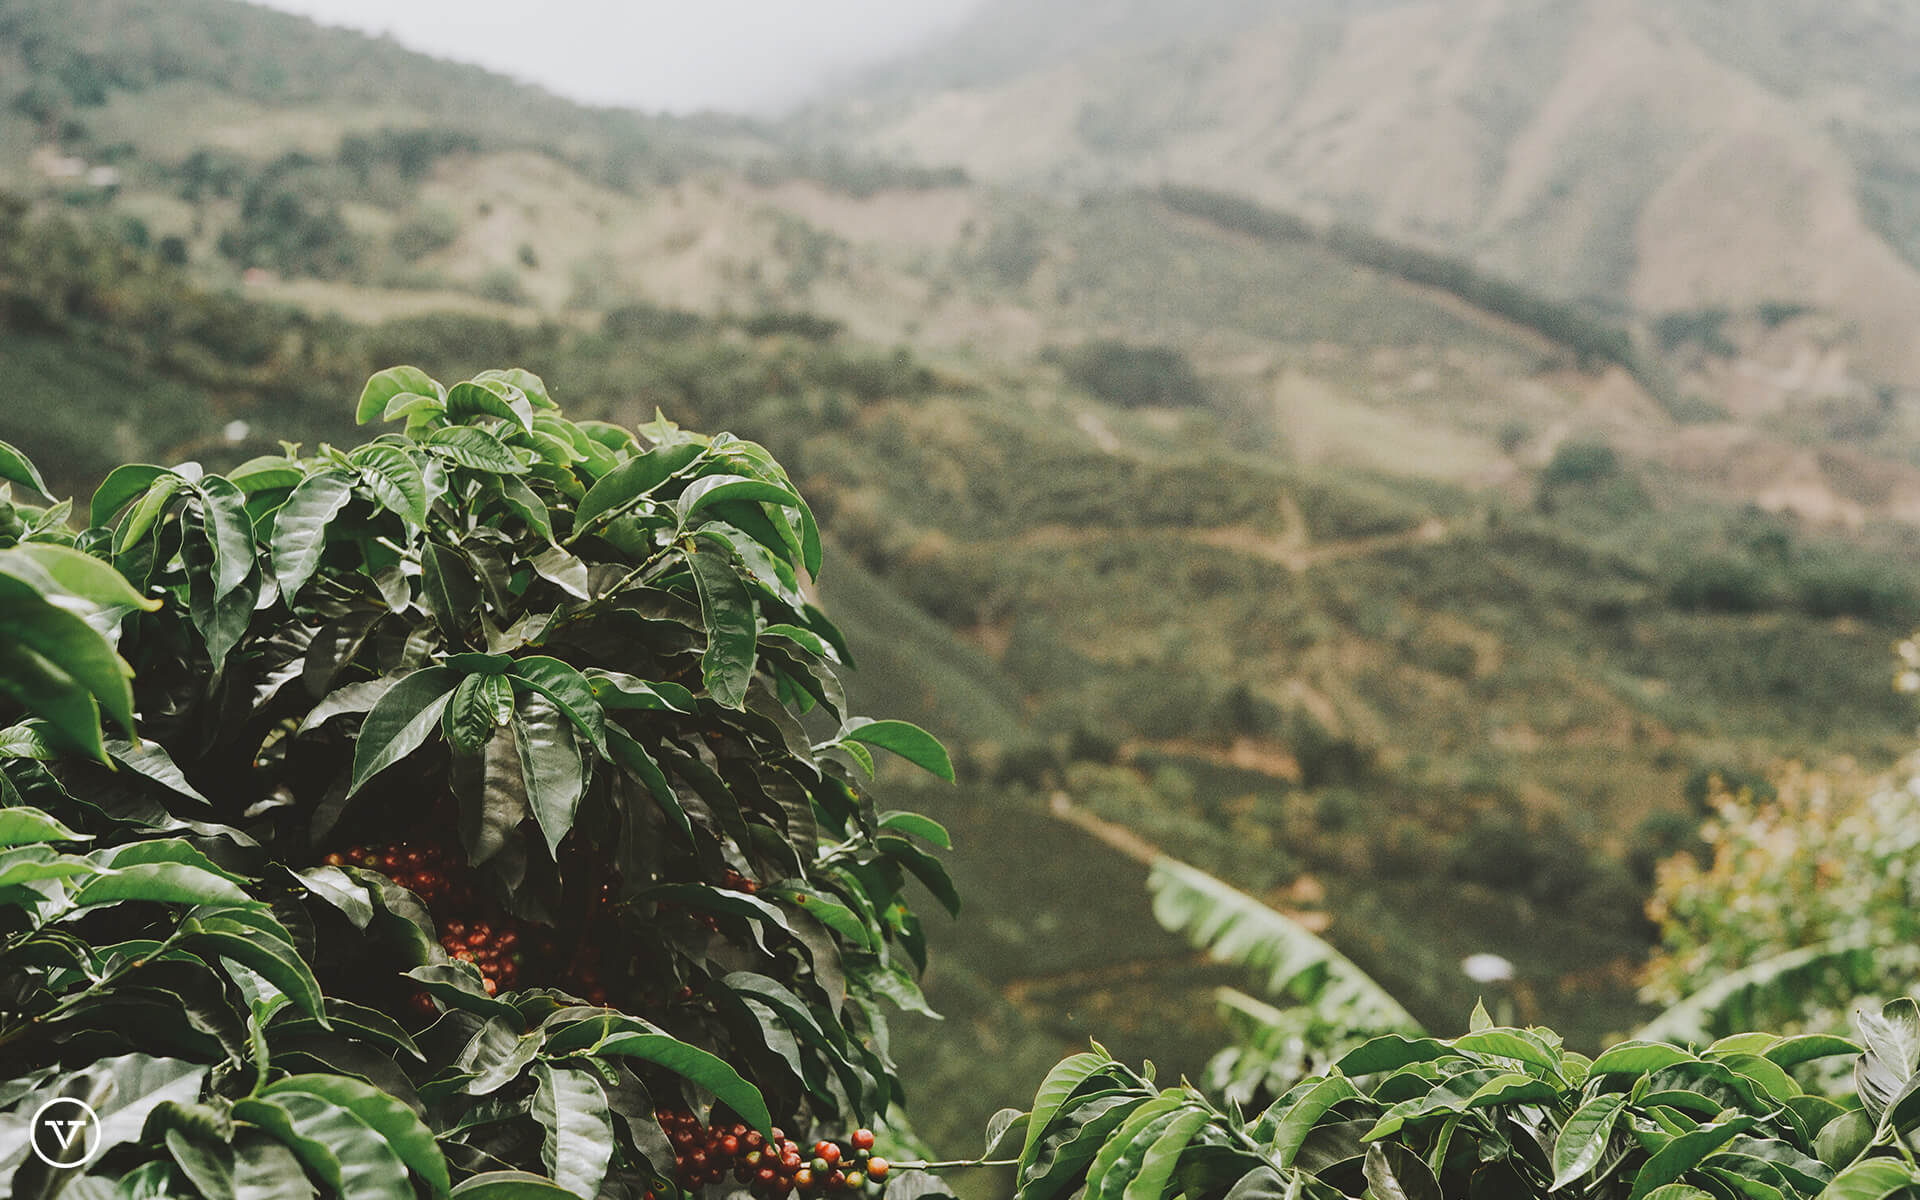 Coffee farm surrounded by mountains in Costa Rica.